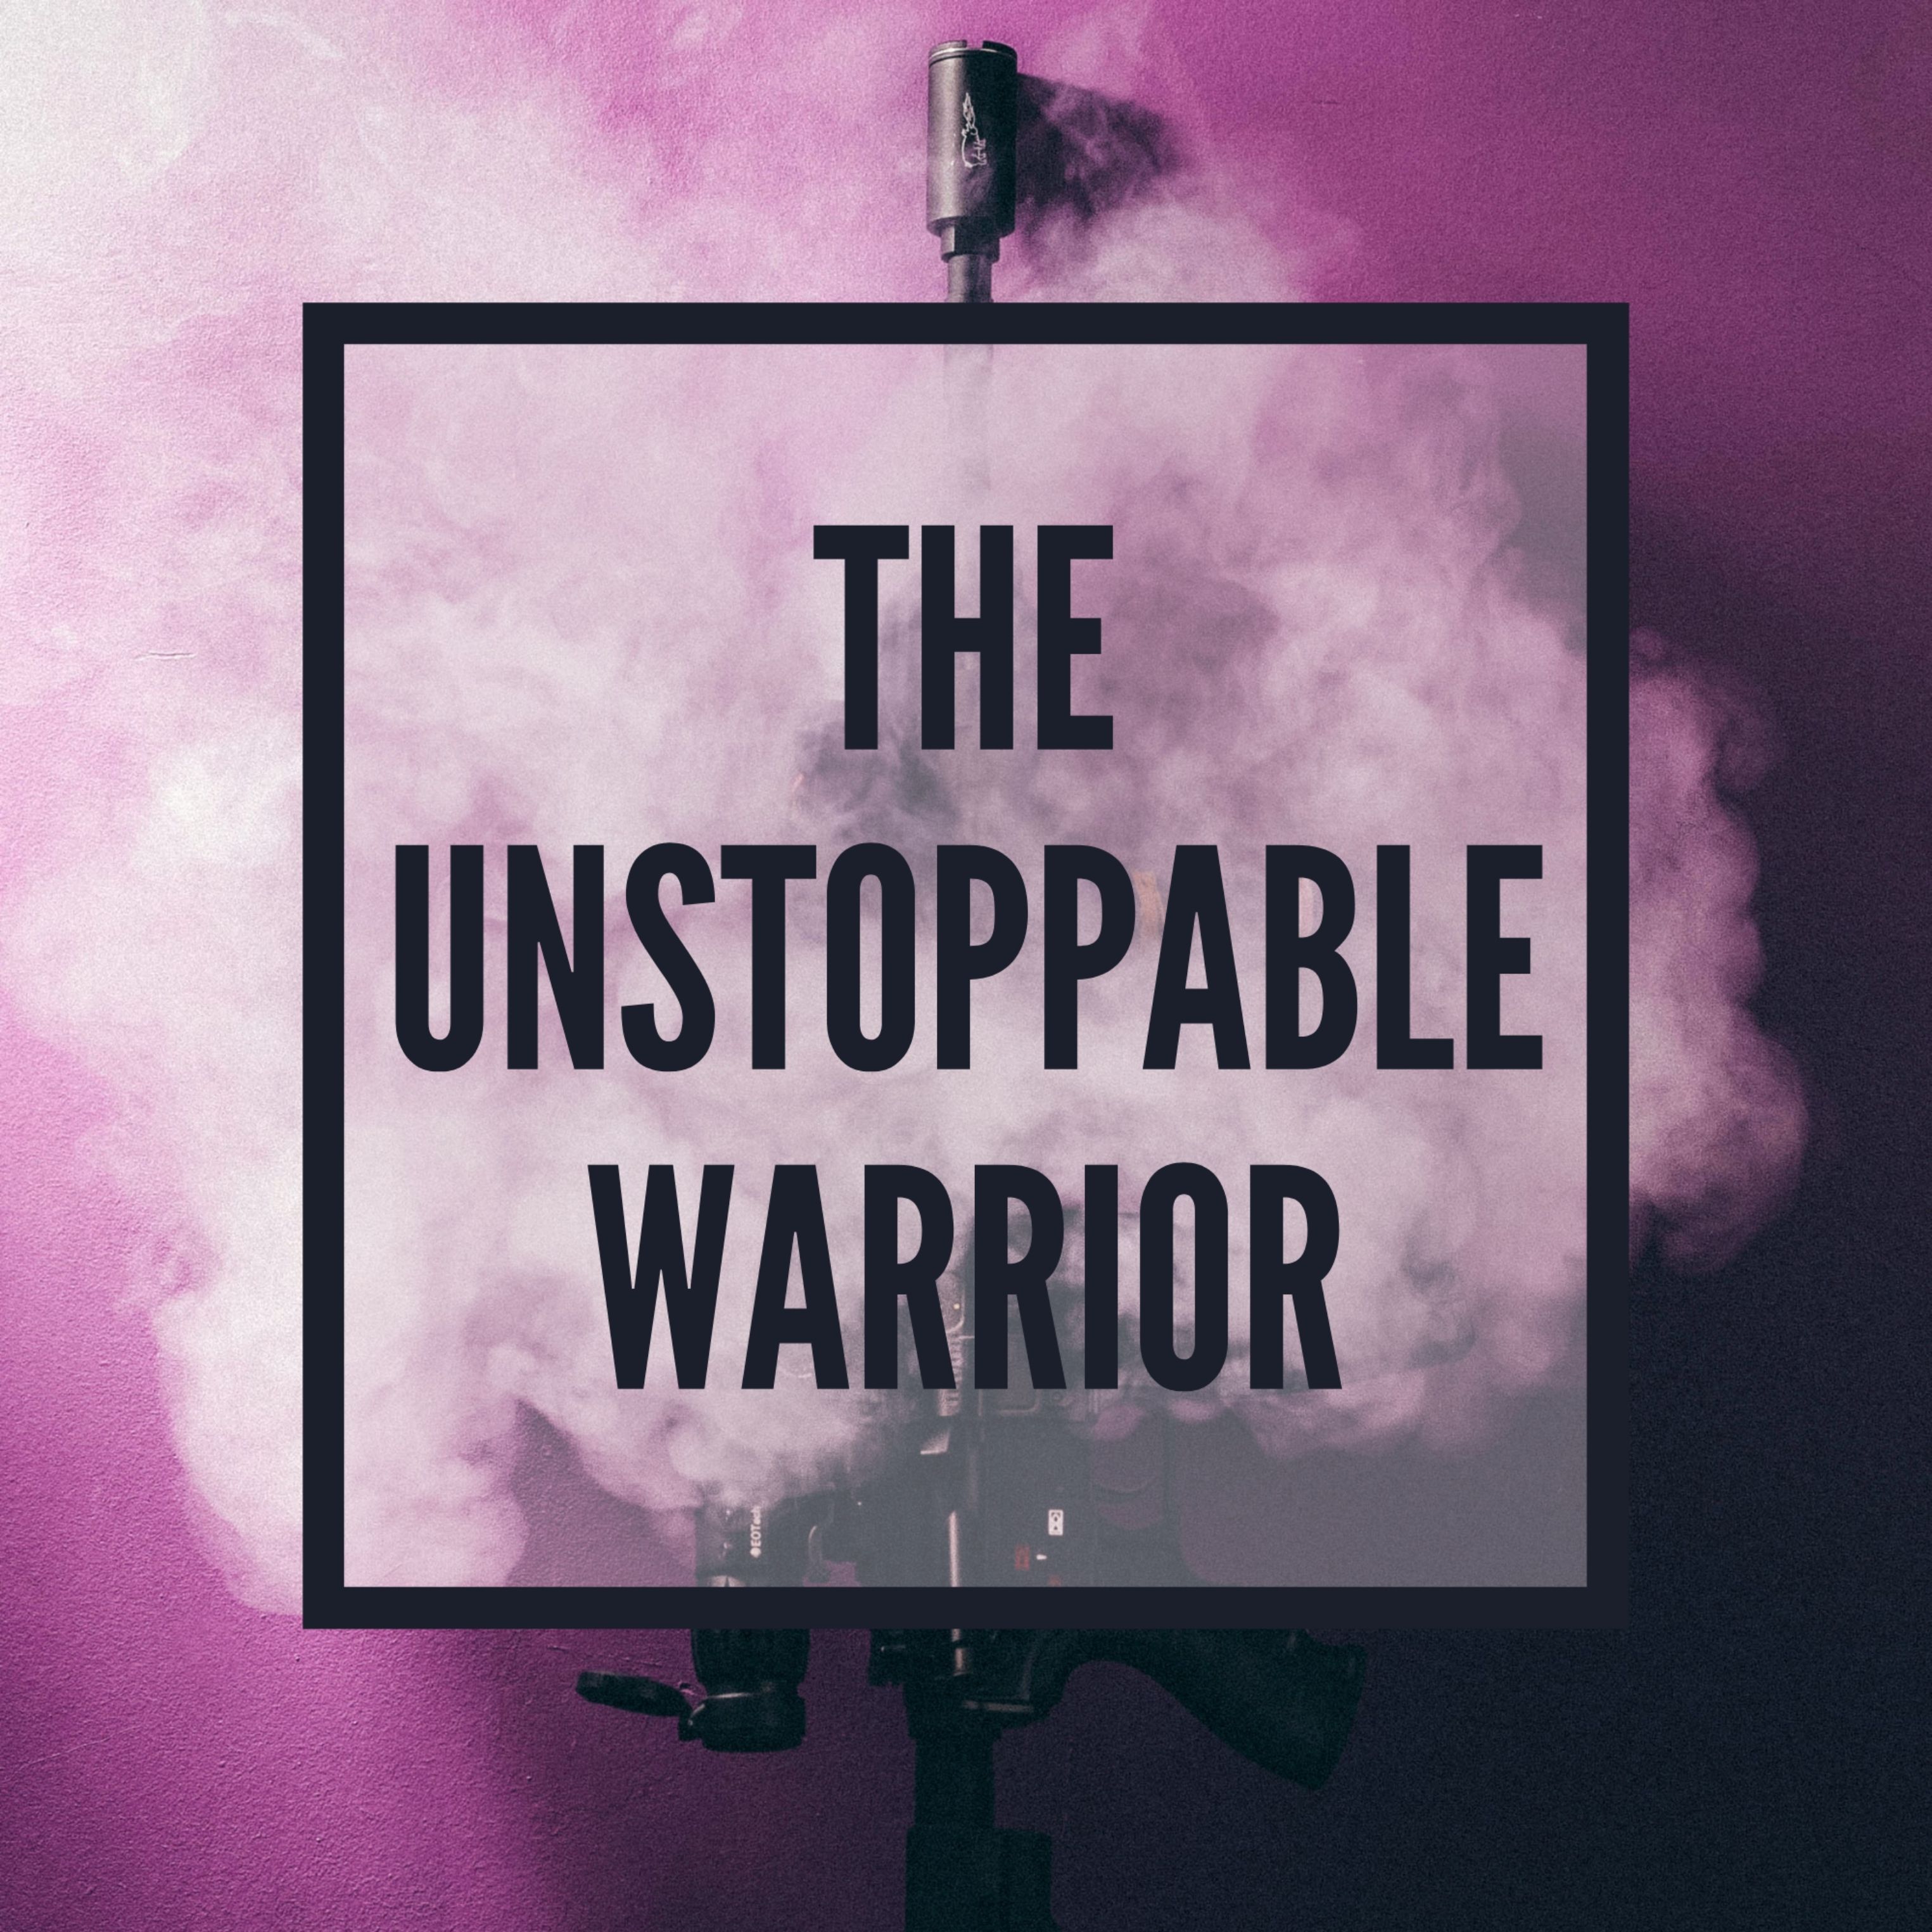 The Unstoppable Warrior